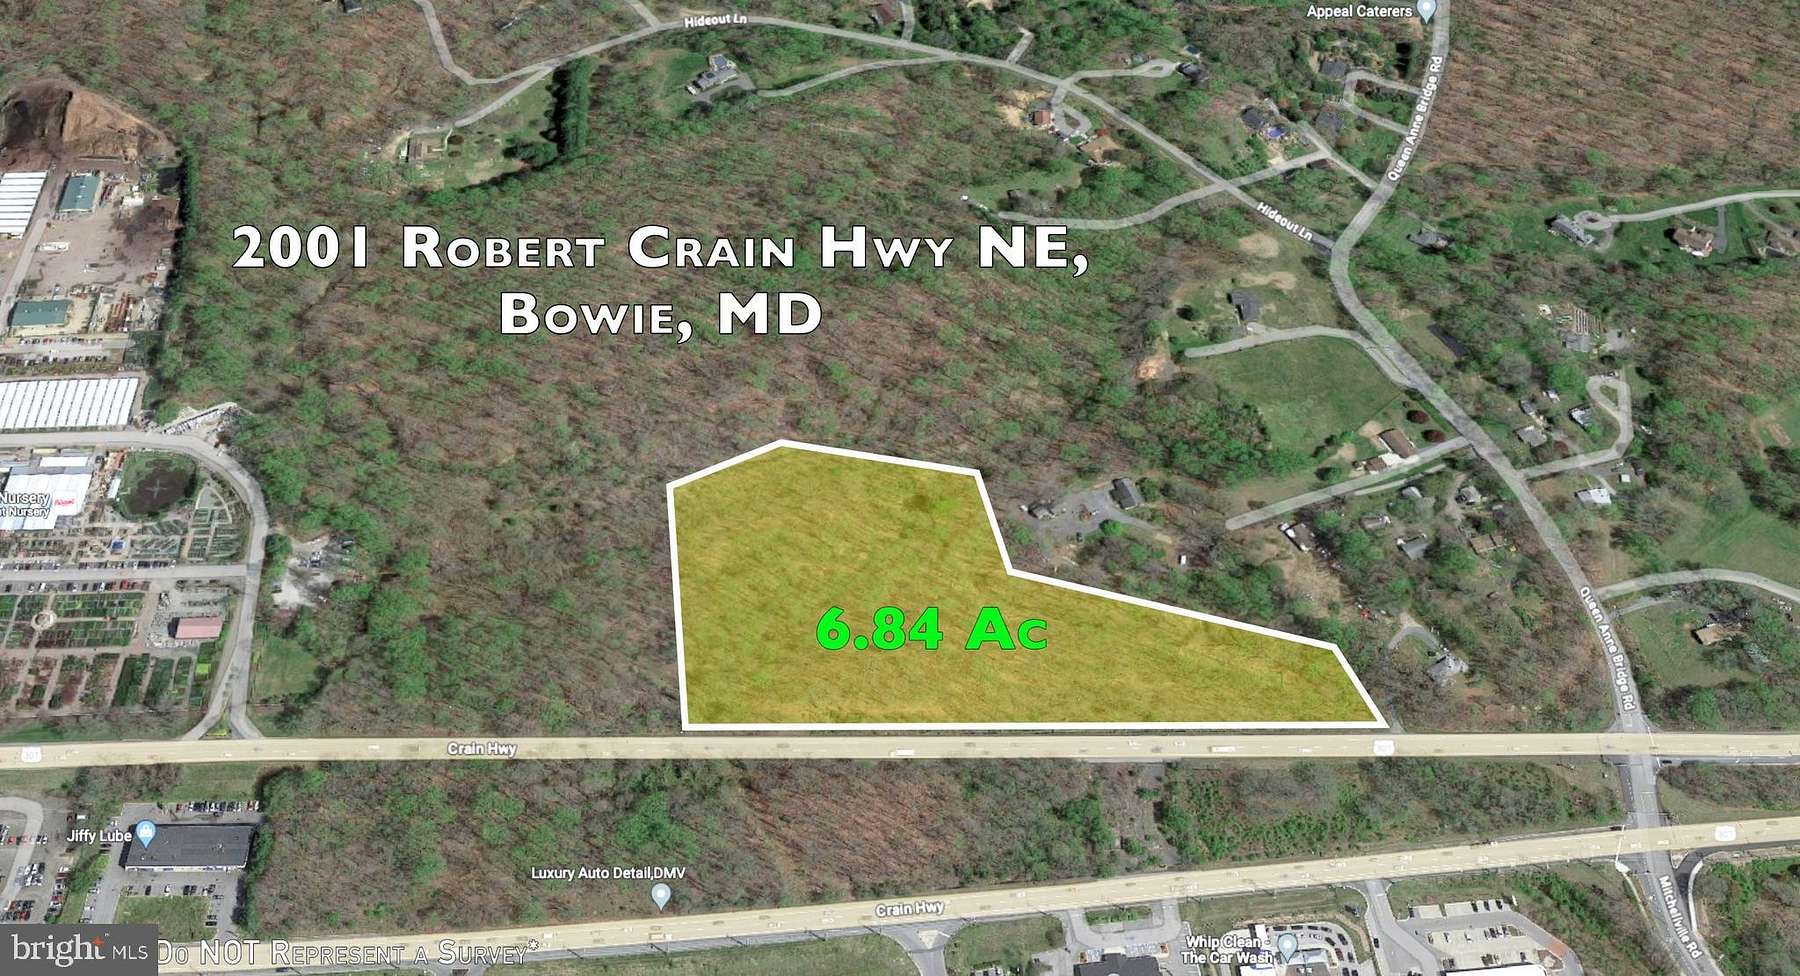 6.8 Acres of Commercial Land for Sale in Bowie, Maryland